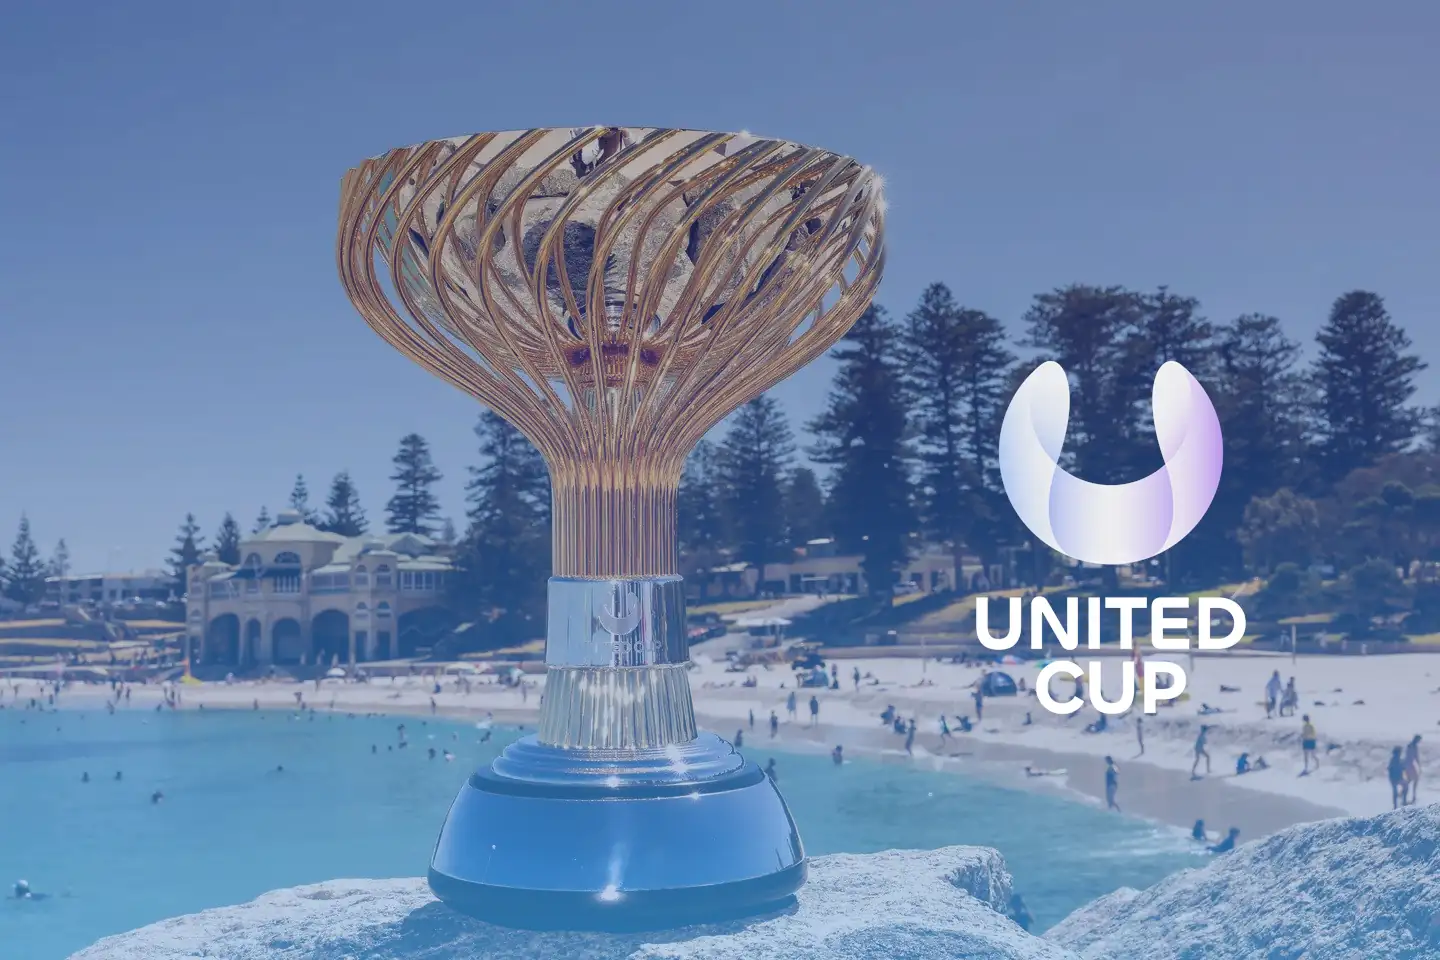 United cup 2023 featured banner image containing united cup 2023 trophy and logo